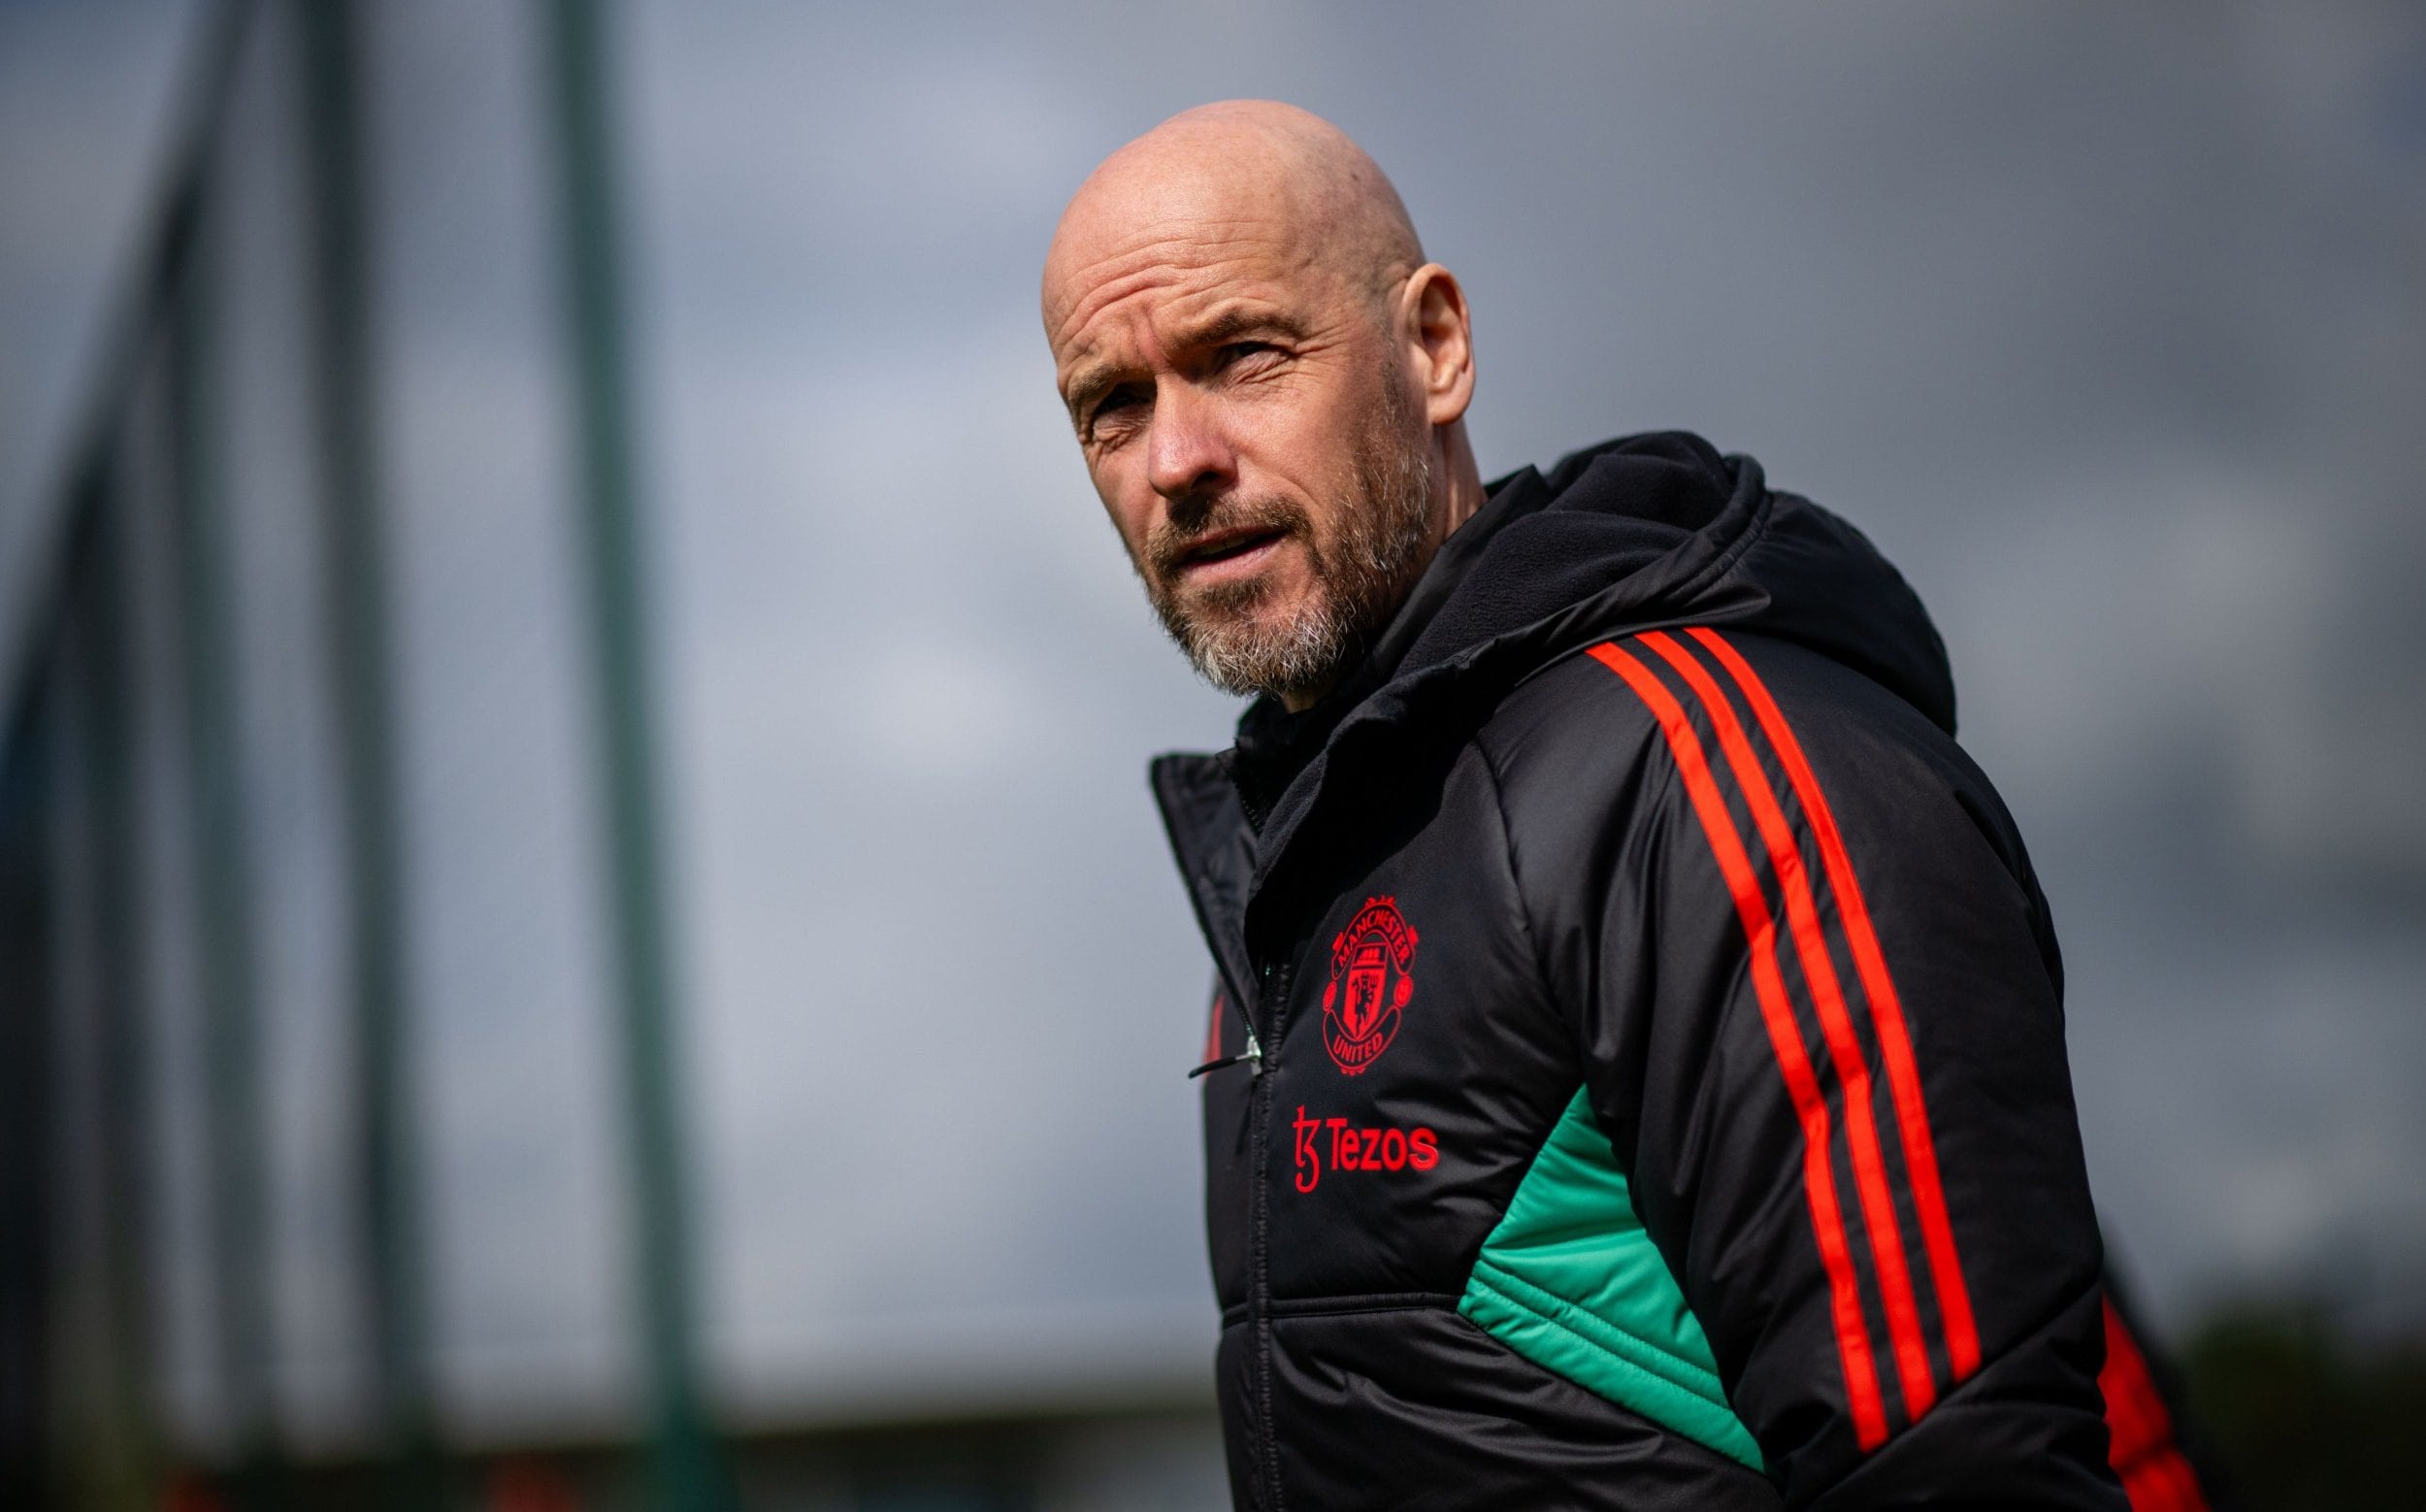 erik ten hag: i have only been able to pick manchester united’s strongest team once